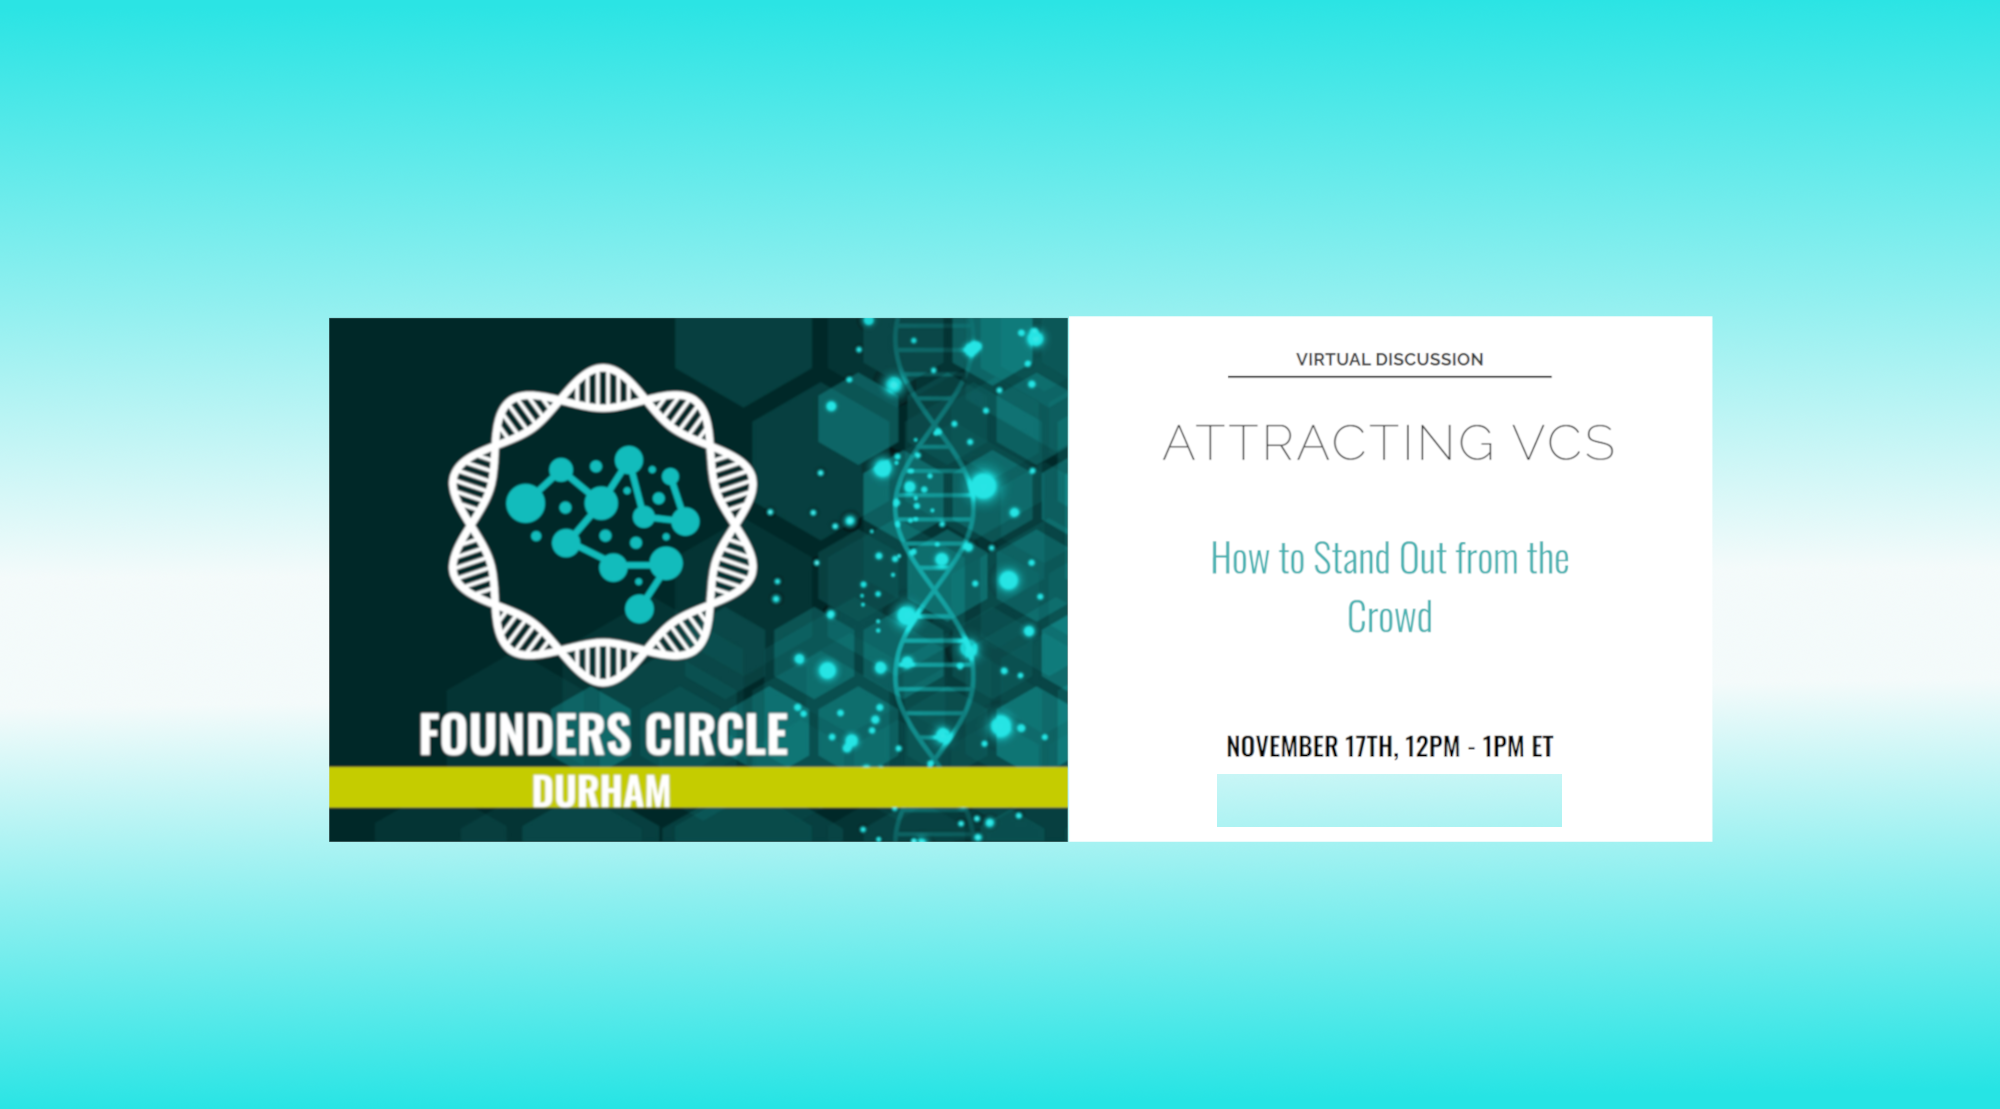 Founders Circle: Attracting VCs: How to Stand Out from the Crowd